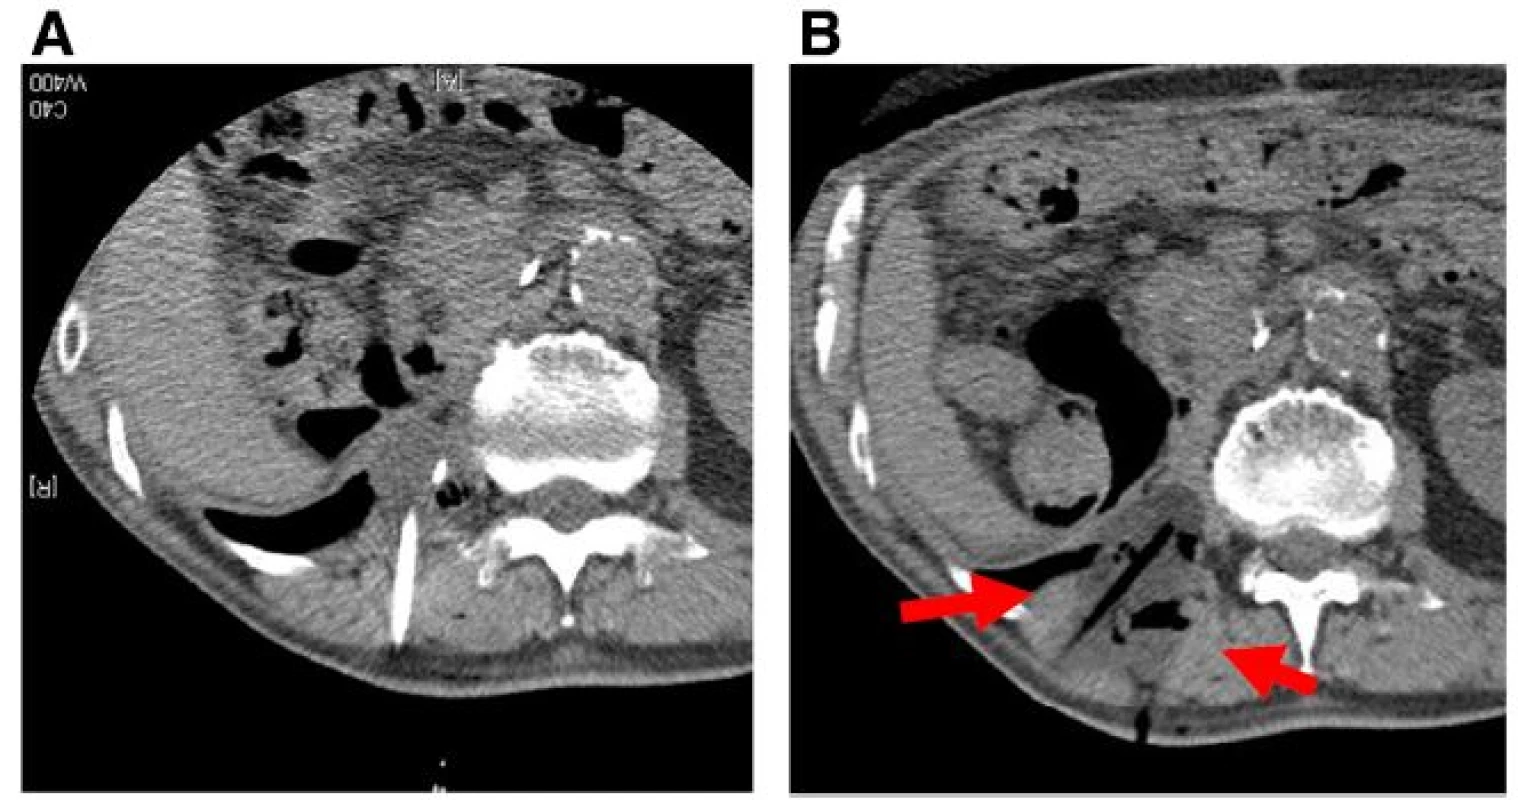 a, b. Multiple synergistic probes were inserted into the tumor to ensure complete encapsulation of the lesion by the ice ball. The ice ball was periodically monitored using CT to secure at least a 1-cm margin around the tumor